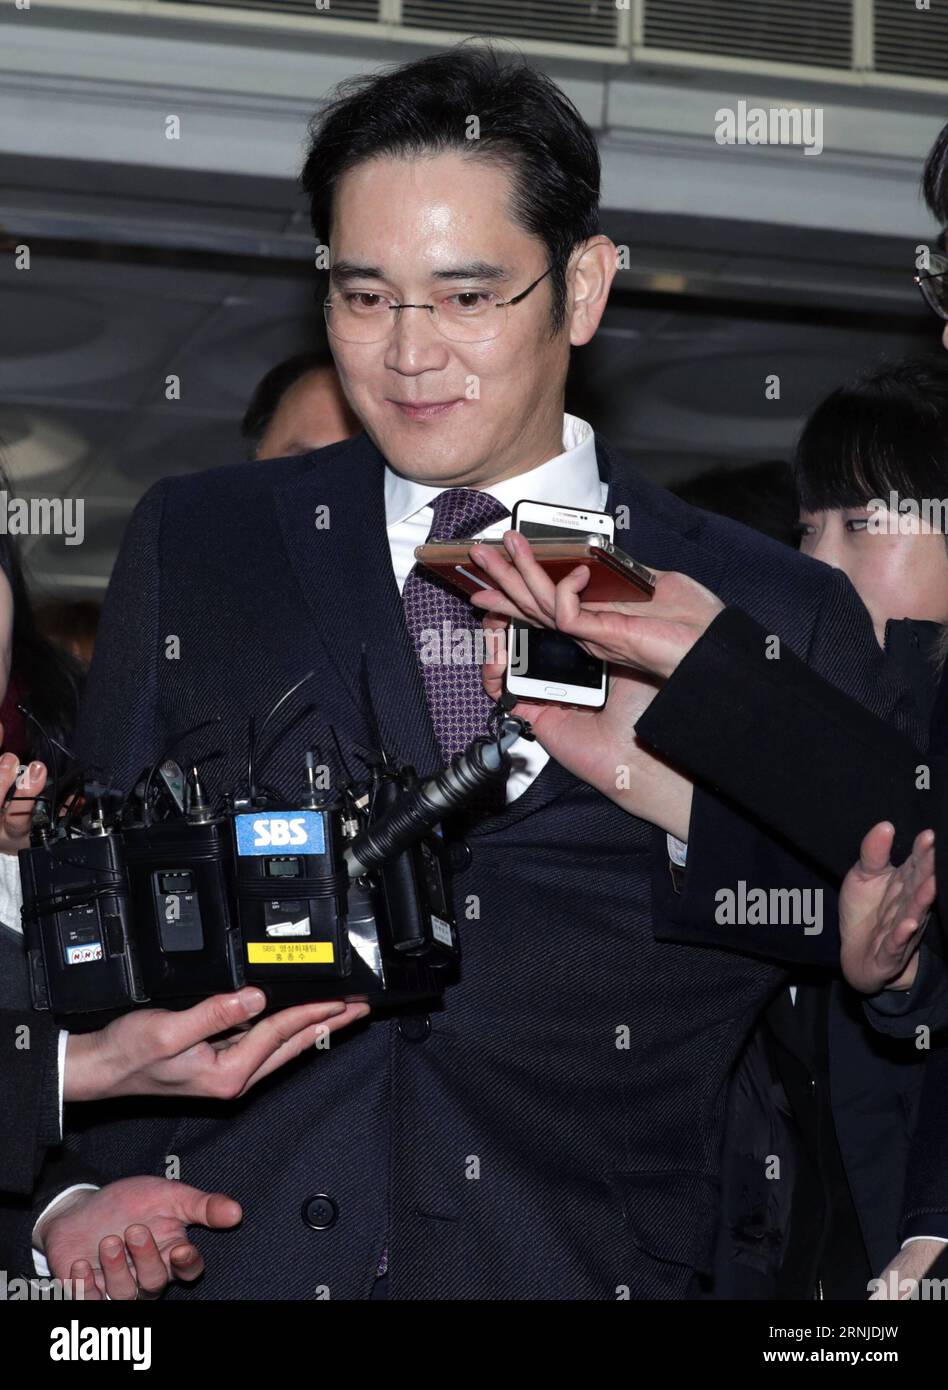 (170118) -- SEOUL, Jan. 18, 2017 -- Samsung Electronics Vice Chairman Lee Jae-yong receives interviews before a court hearing in Seoul, South Korea, Jan. 18, 2017. Samsung Electronics Vice Chairman Lee Jae-yong appeared in court on Wednesday for determination on his arrest warrant which prosecutors sought two days earlier. )(zcc) SOUTH KOREA-SEOUL-LEE JAE-YONG-HEARING LeexSang-ho PUBLICATIONxNOTxINxCHN   Seoul Jan 18 2017 Samsung Electronics Vice Chairman Lee Jae Yong receives Interviews Before a Court Hearing in Seoul South Korea Jan 18 2017 Samsung Electronics Vice Chairman Lee Jae Yong appe Stock Photo